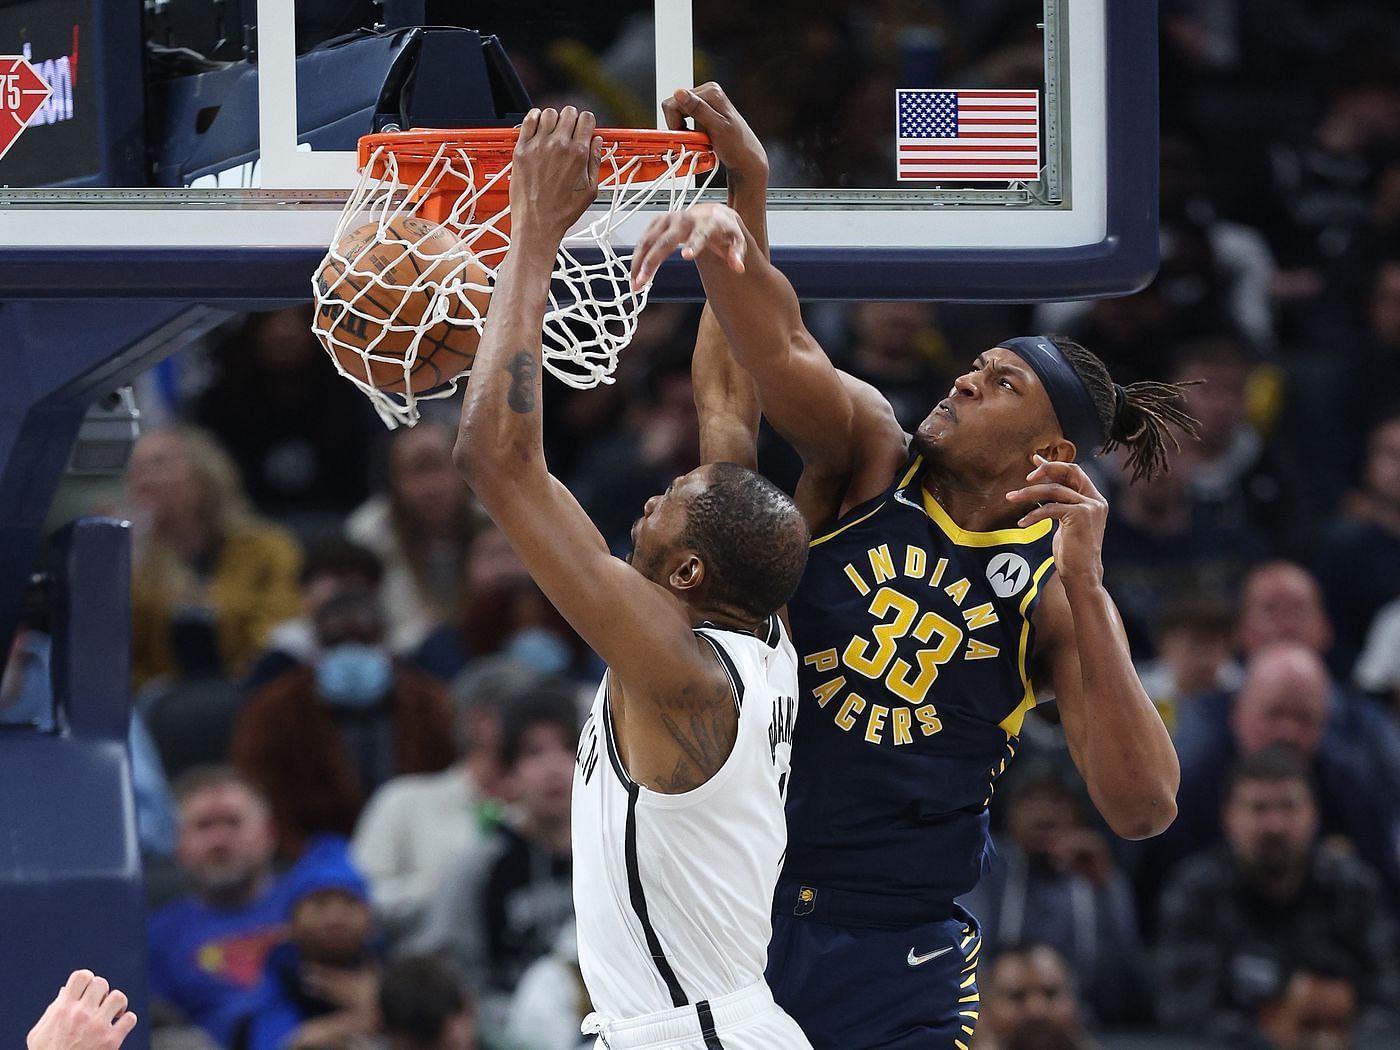 Myles Turner of the Indiana Pacers tries to block Kevin Durant of the Brooklyn Nets.